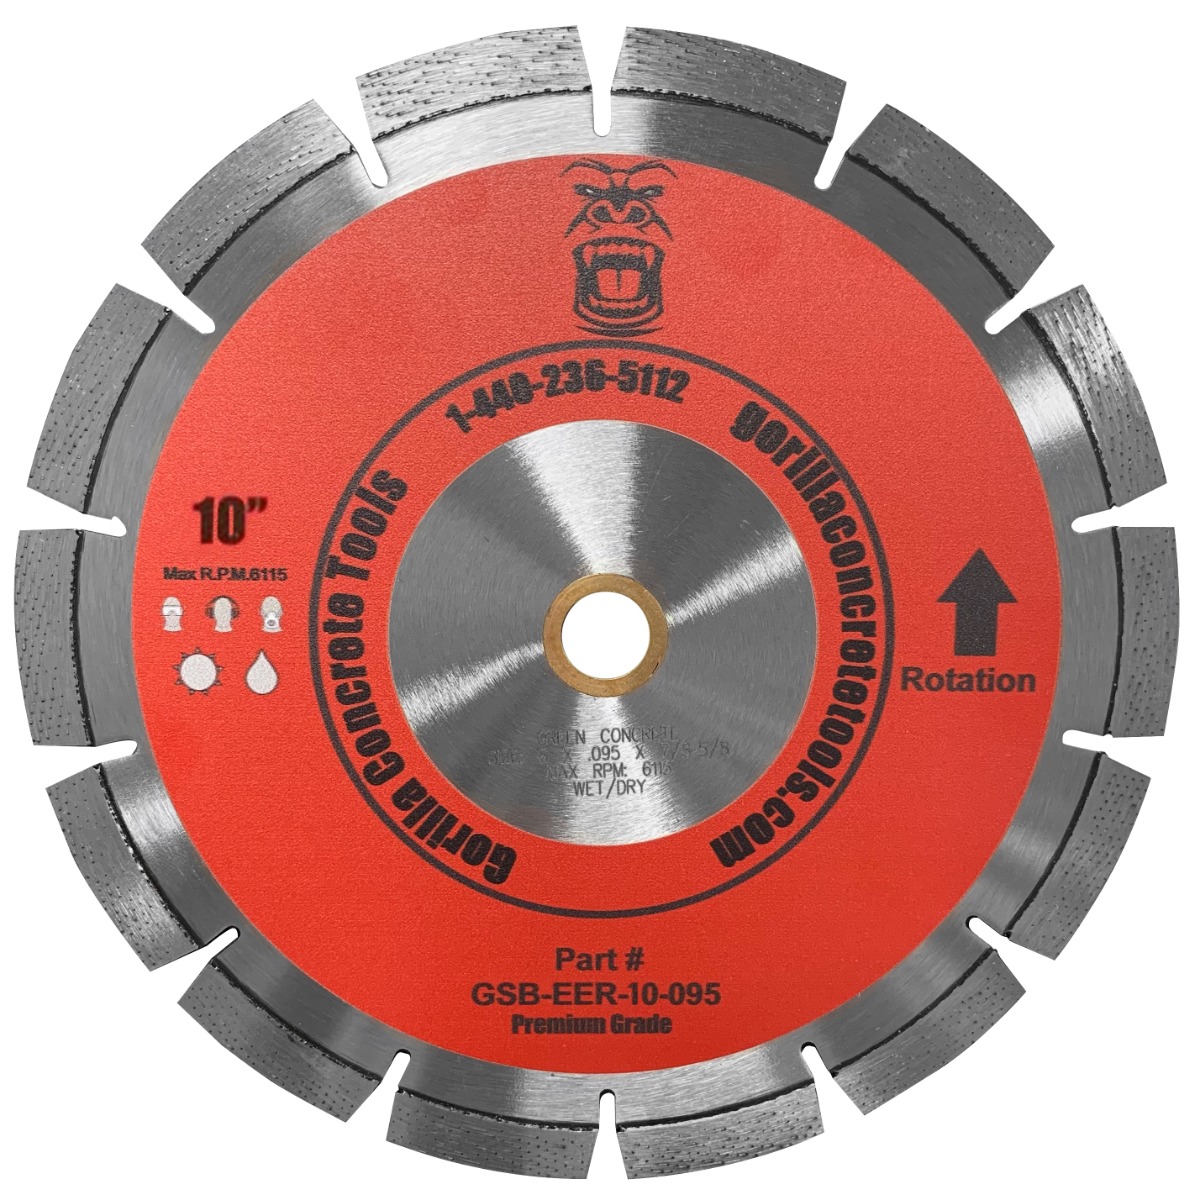 Gorilla 10" Early Entry Diamond Blade with 7/8" arbor. Made for use on the GS-300 Self-propelled Early Entry Soft Cut Floor. The ten inch blade will give you a maximum of 3 inches depth cut on the concrete when used with the above early entry saw. Availab